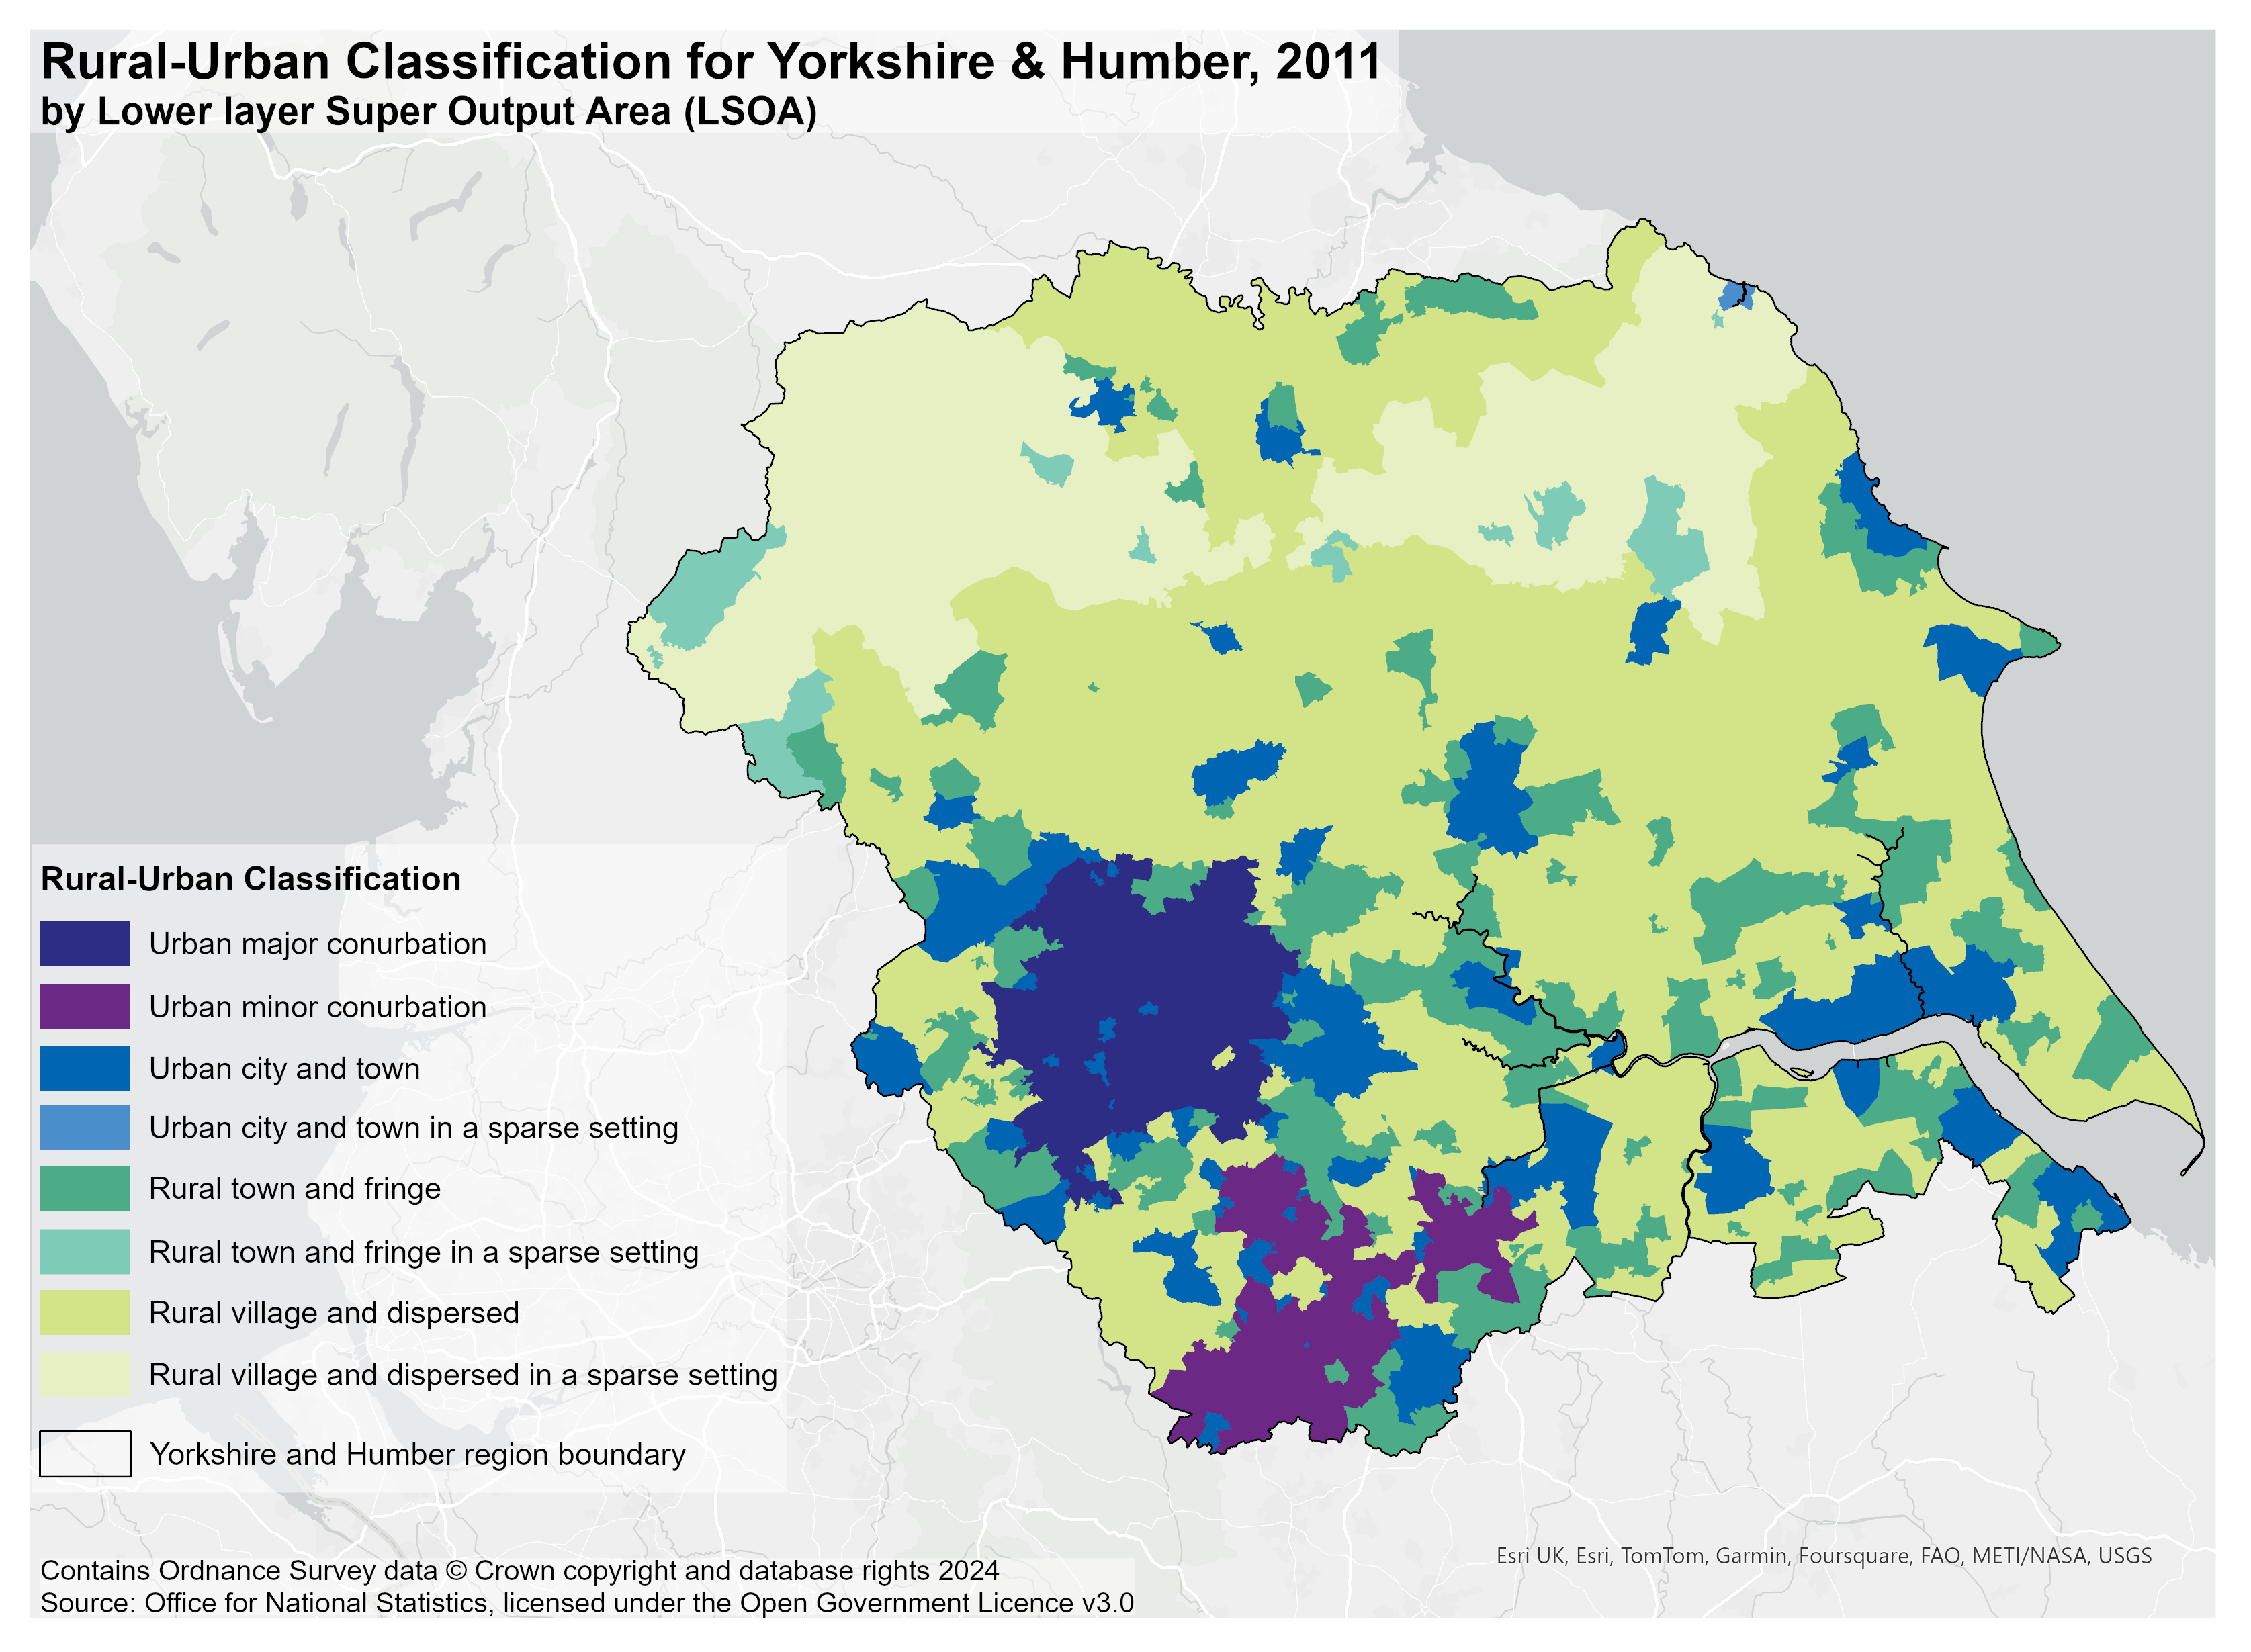 Rural-Urban Classification of OAs in Yorkshire and the Humber